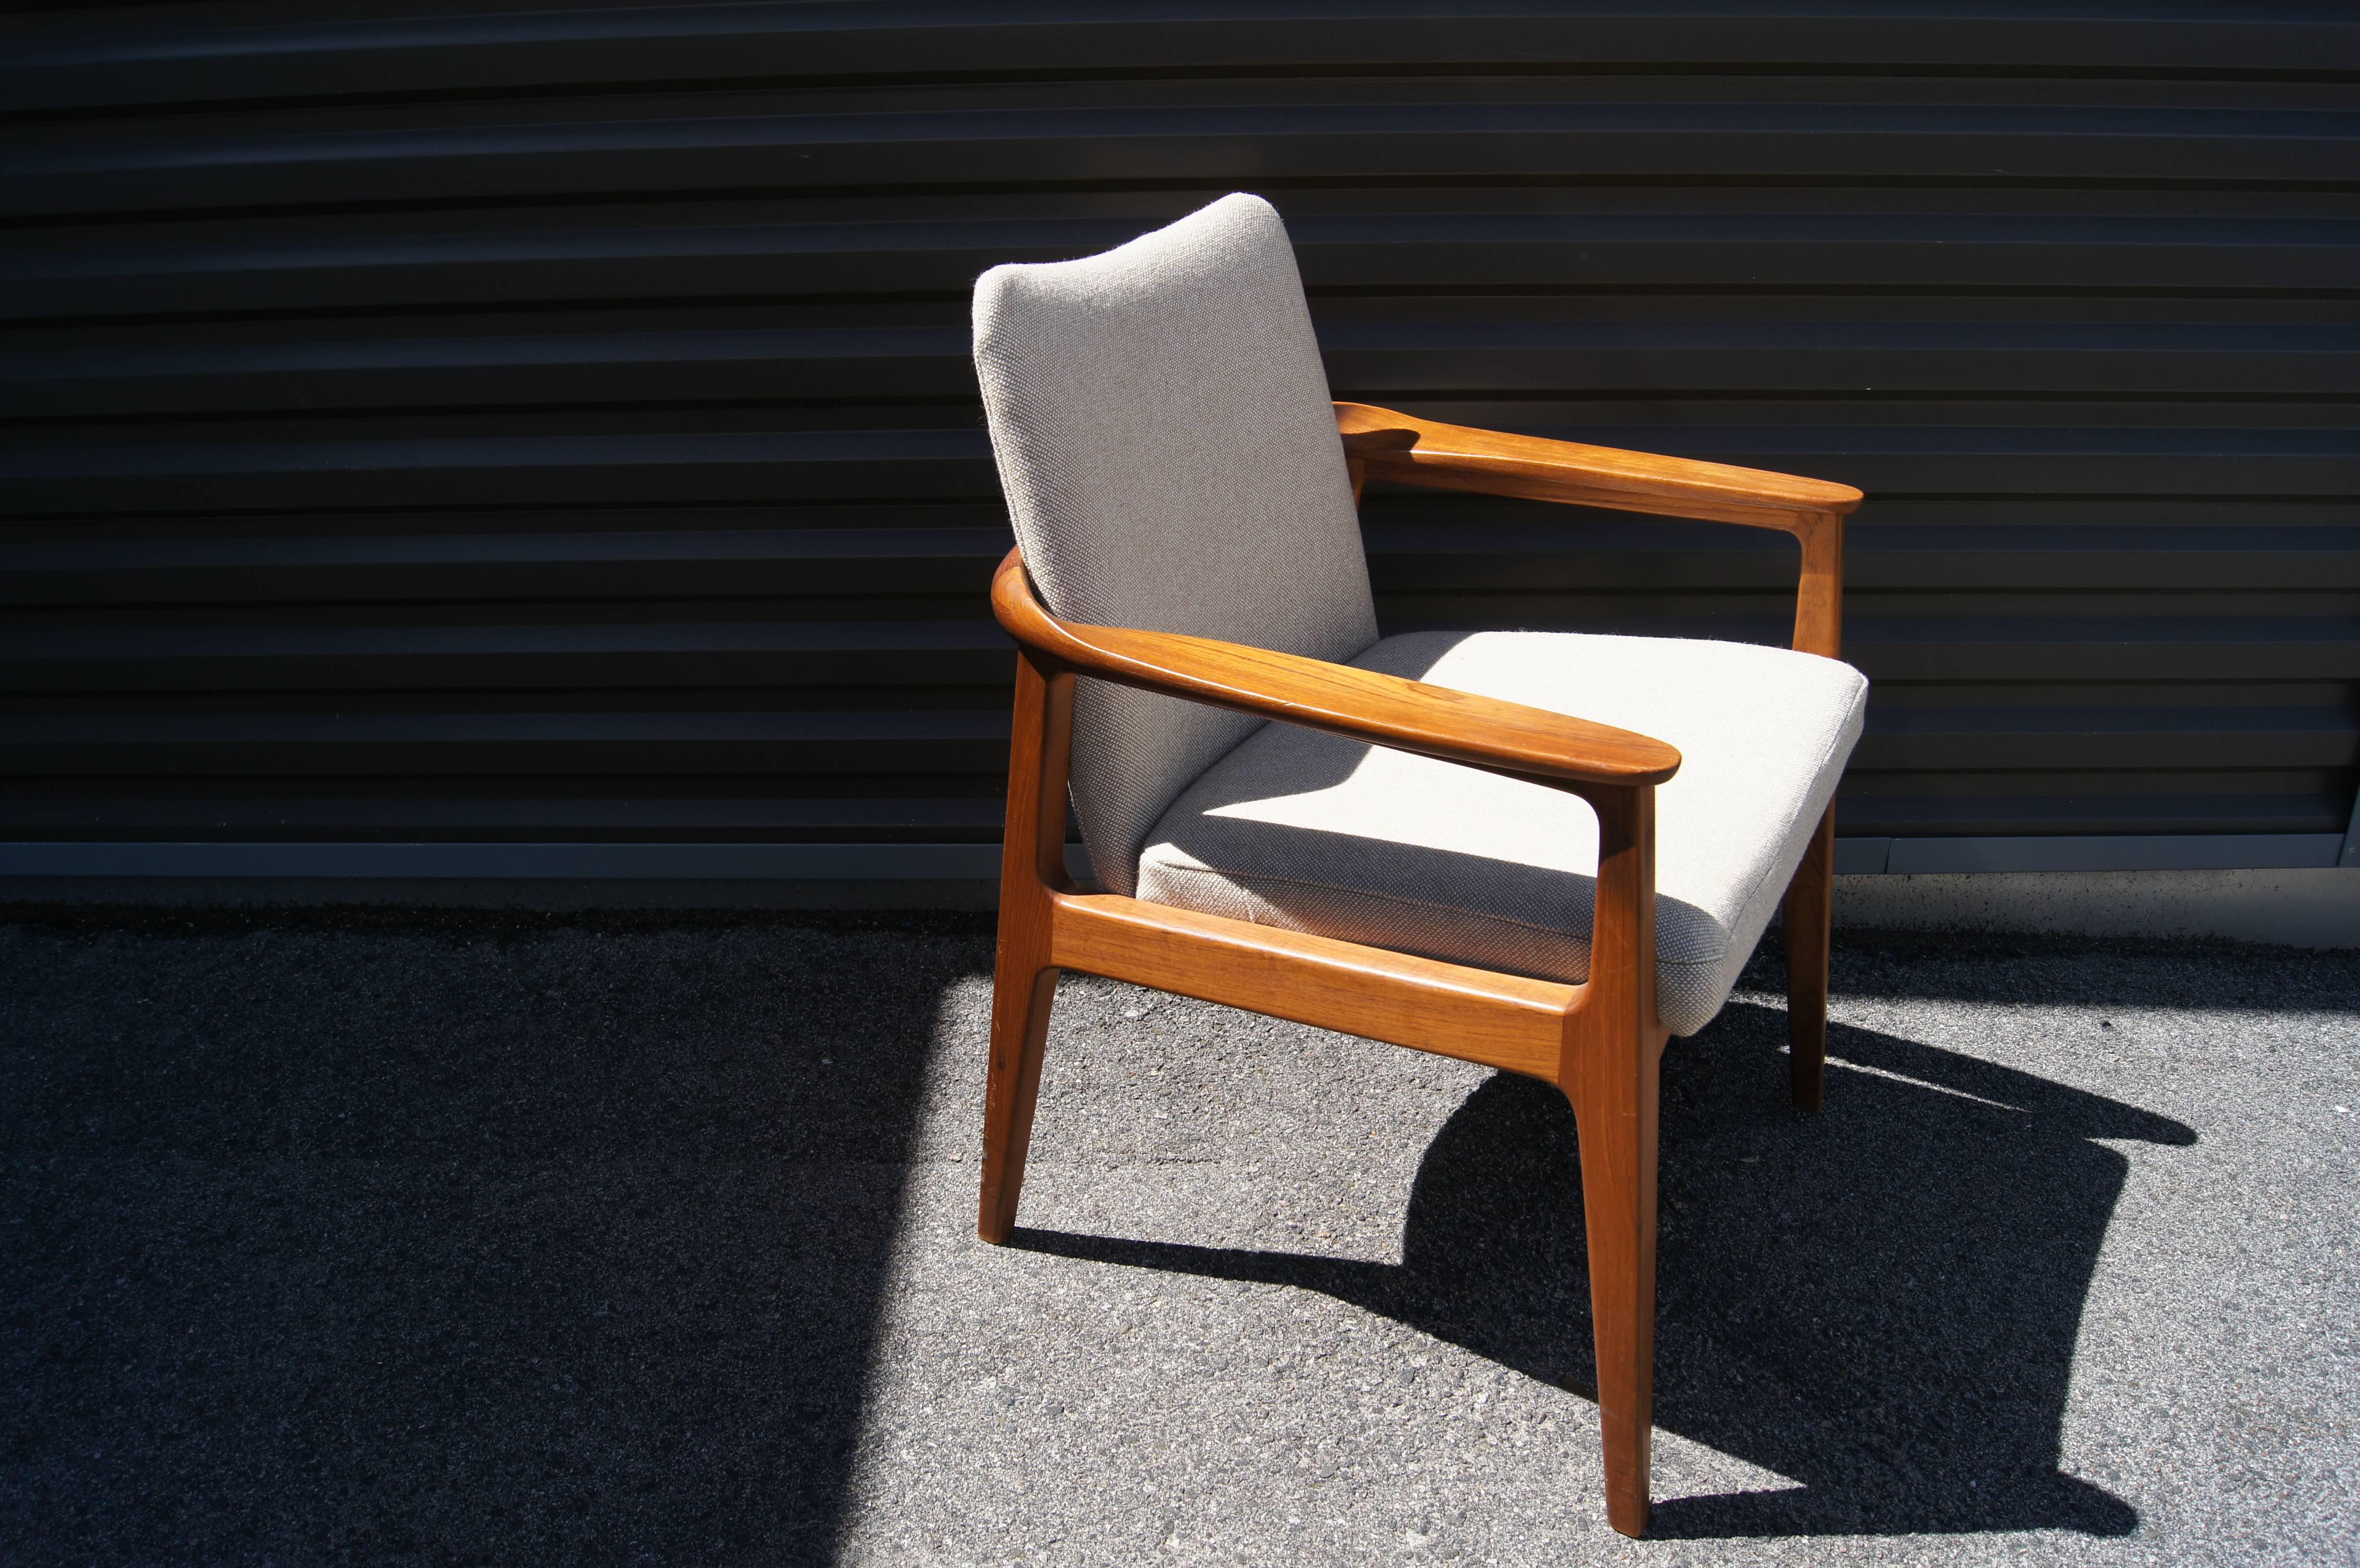 Created by Swedish designer (and member of the royal family) Sigvard Bernadotte, this armchair features a solid teak frame, with lovely joinery details, whose rounded back flattens to paddle arms. It has been reupholstered in Maharam's Hallingdal by